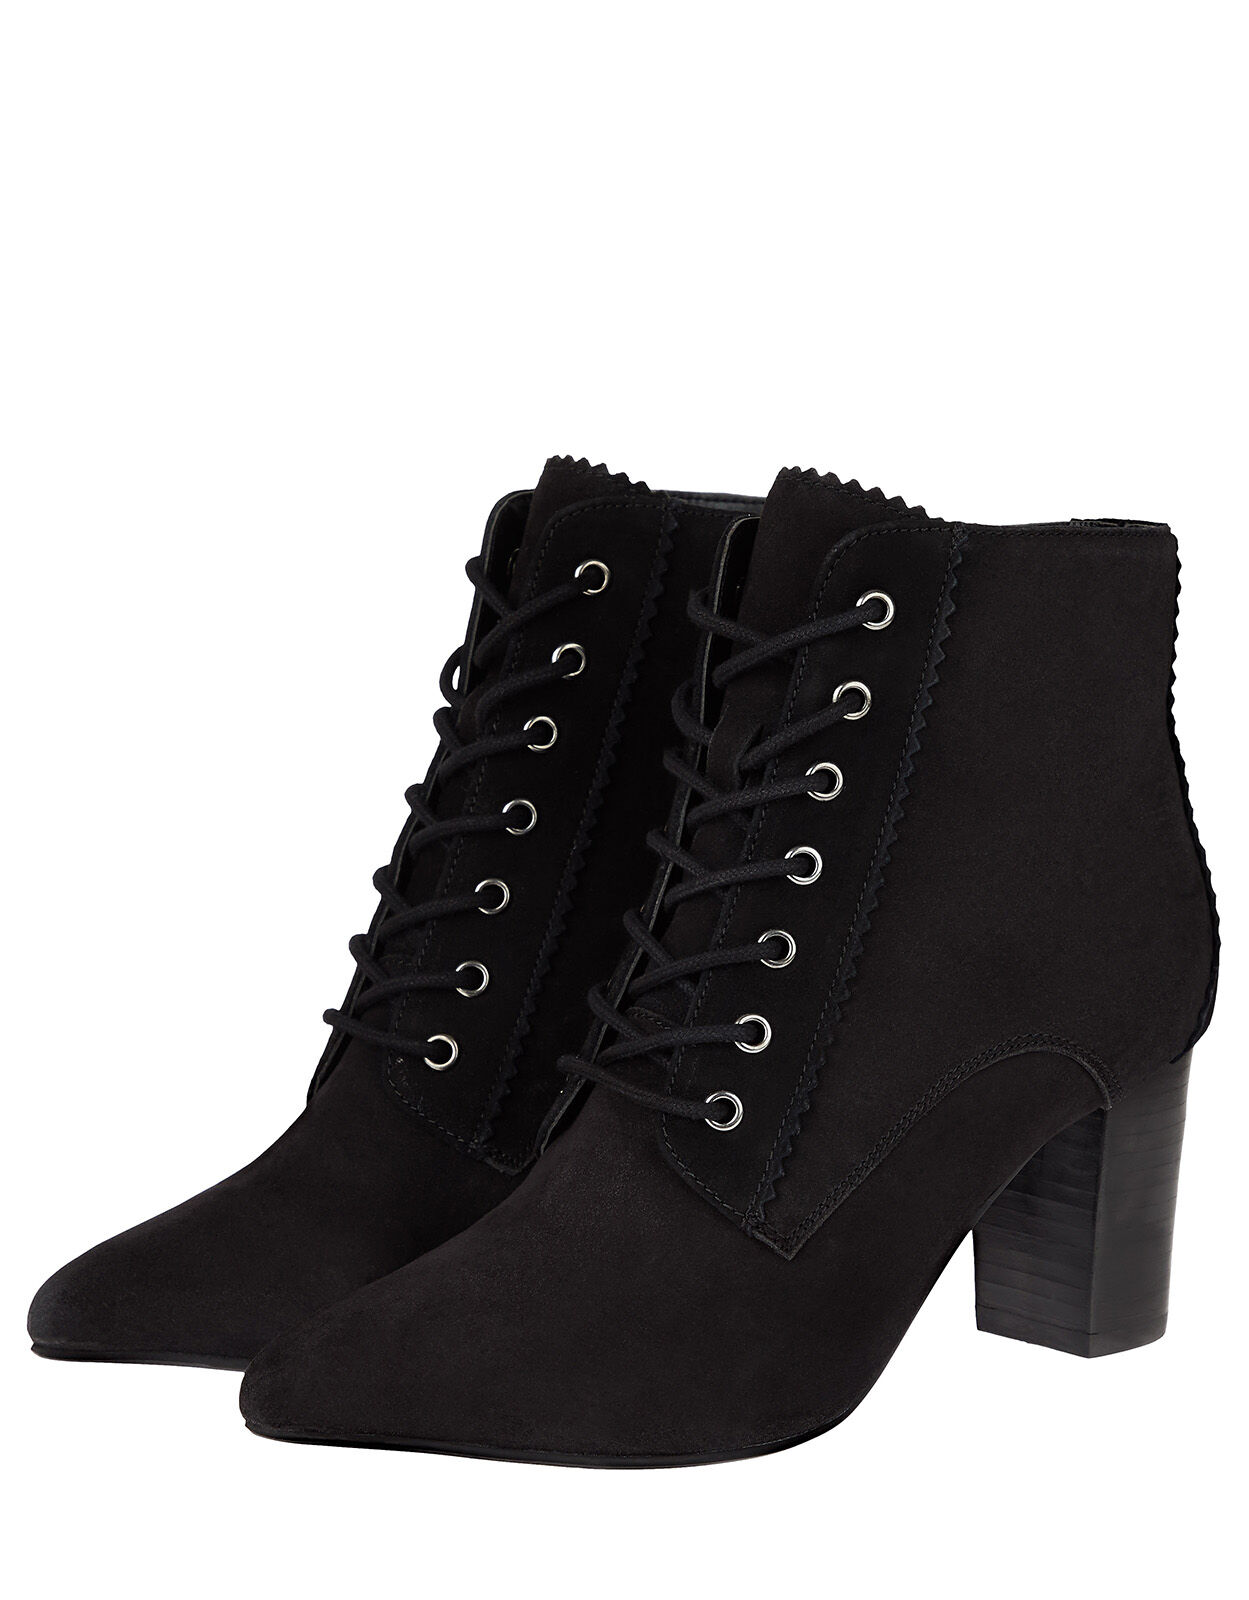 Lace-Up Suede Heeled Ankle Boots Black 